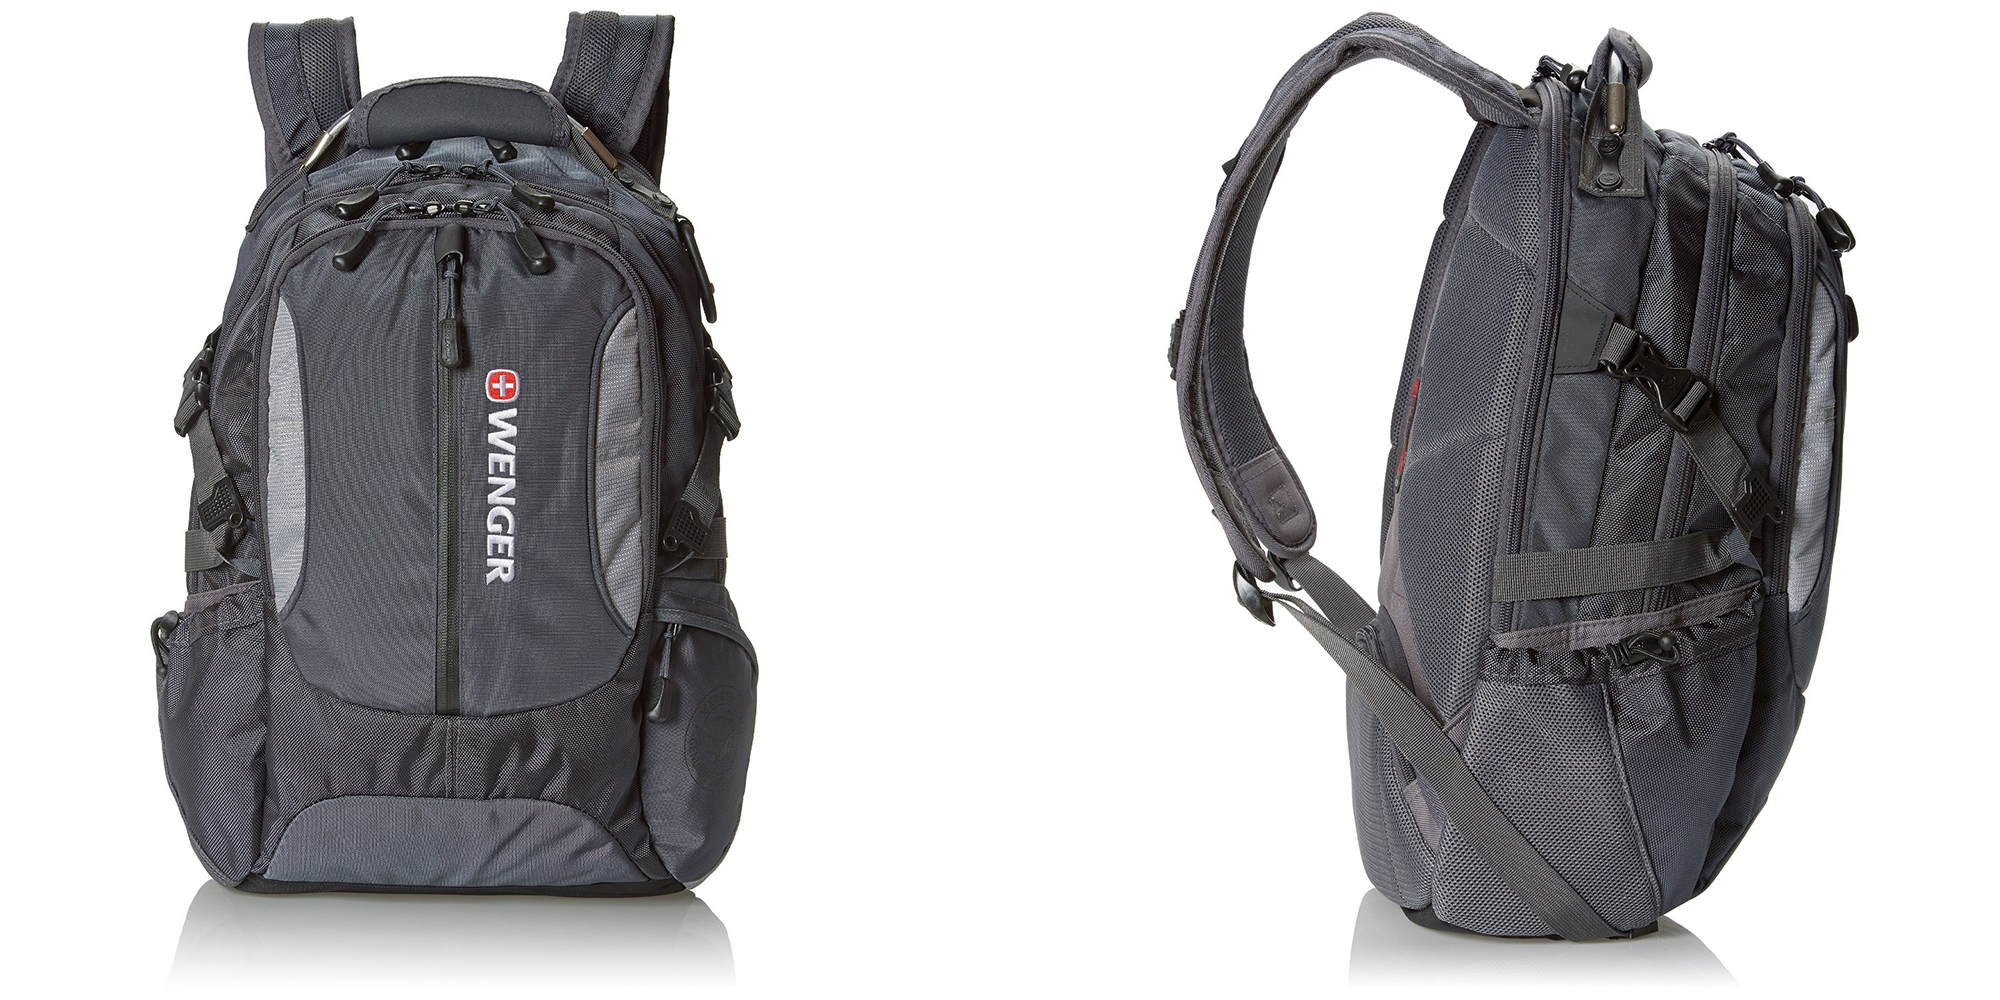 De lucht bioscoop stormloop Wenger Backpack for MacBooks up to 15-inches: $35 Prime shipped (Reg. $50+)